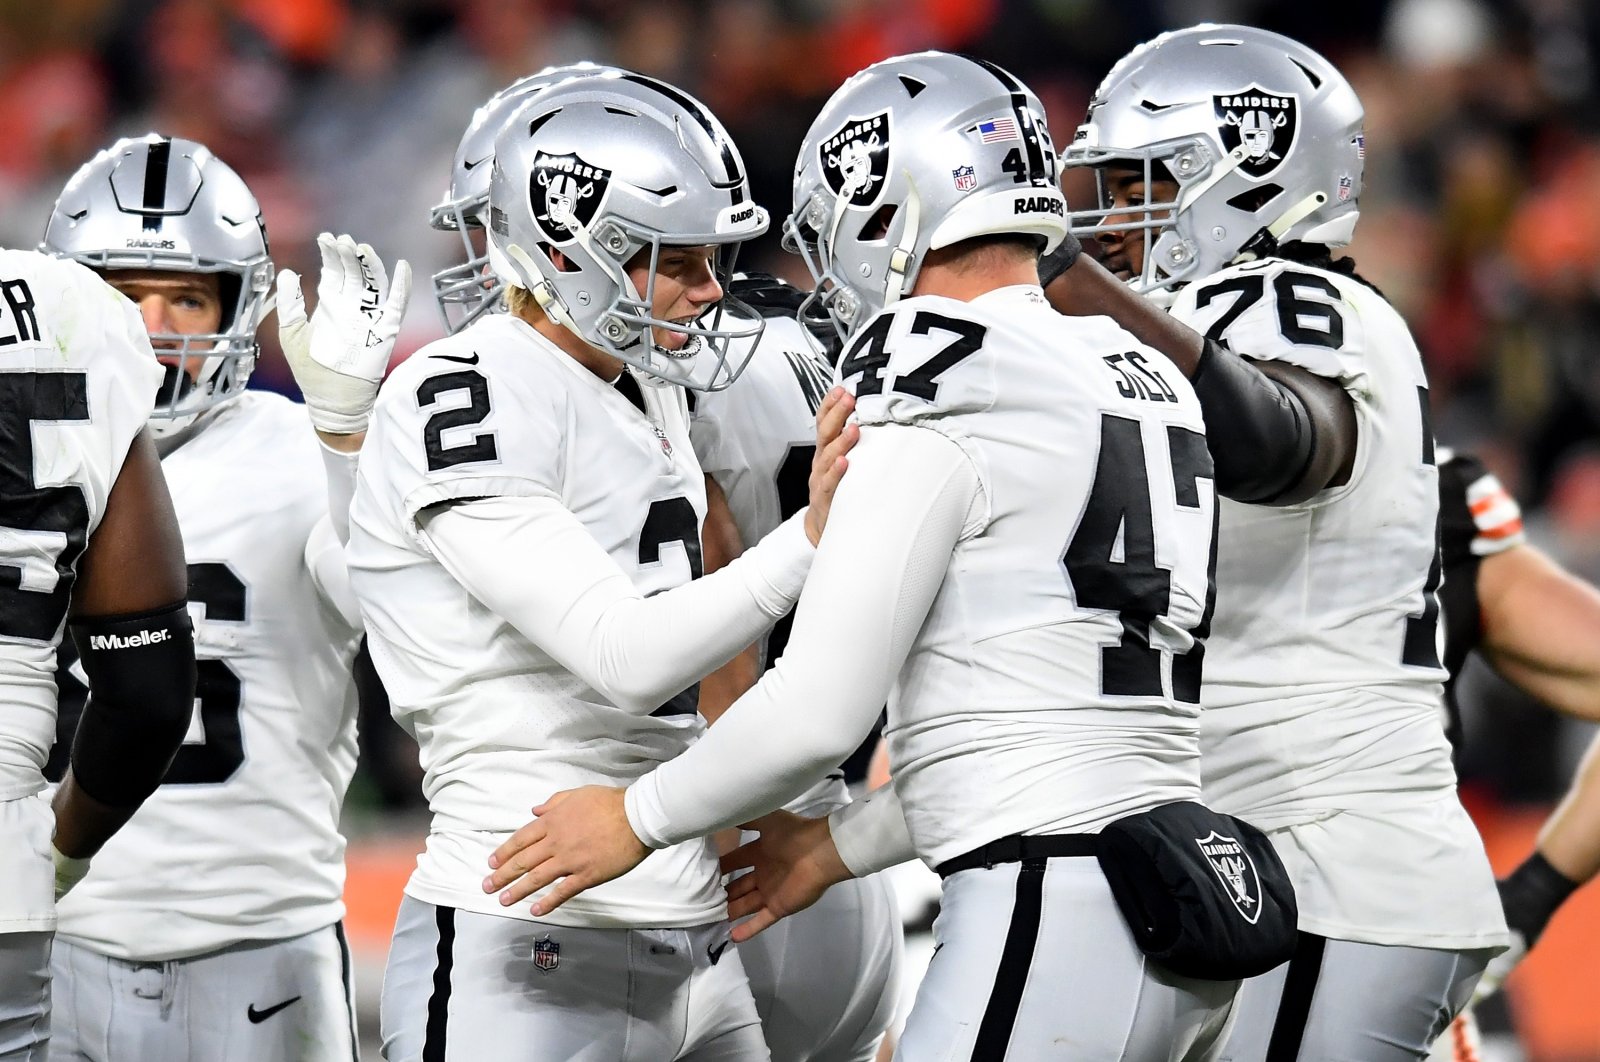 Las Vegas Raiders Daniel Carlson (2nd L) celebrates with teammates after scoring a successful field goal during an NFL game against the Cleveland Browns, Cleveland, Ohio, Dec. 20, 2021. (AFP Photo)